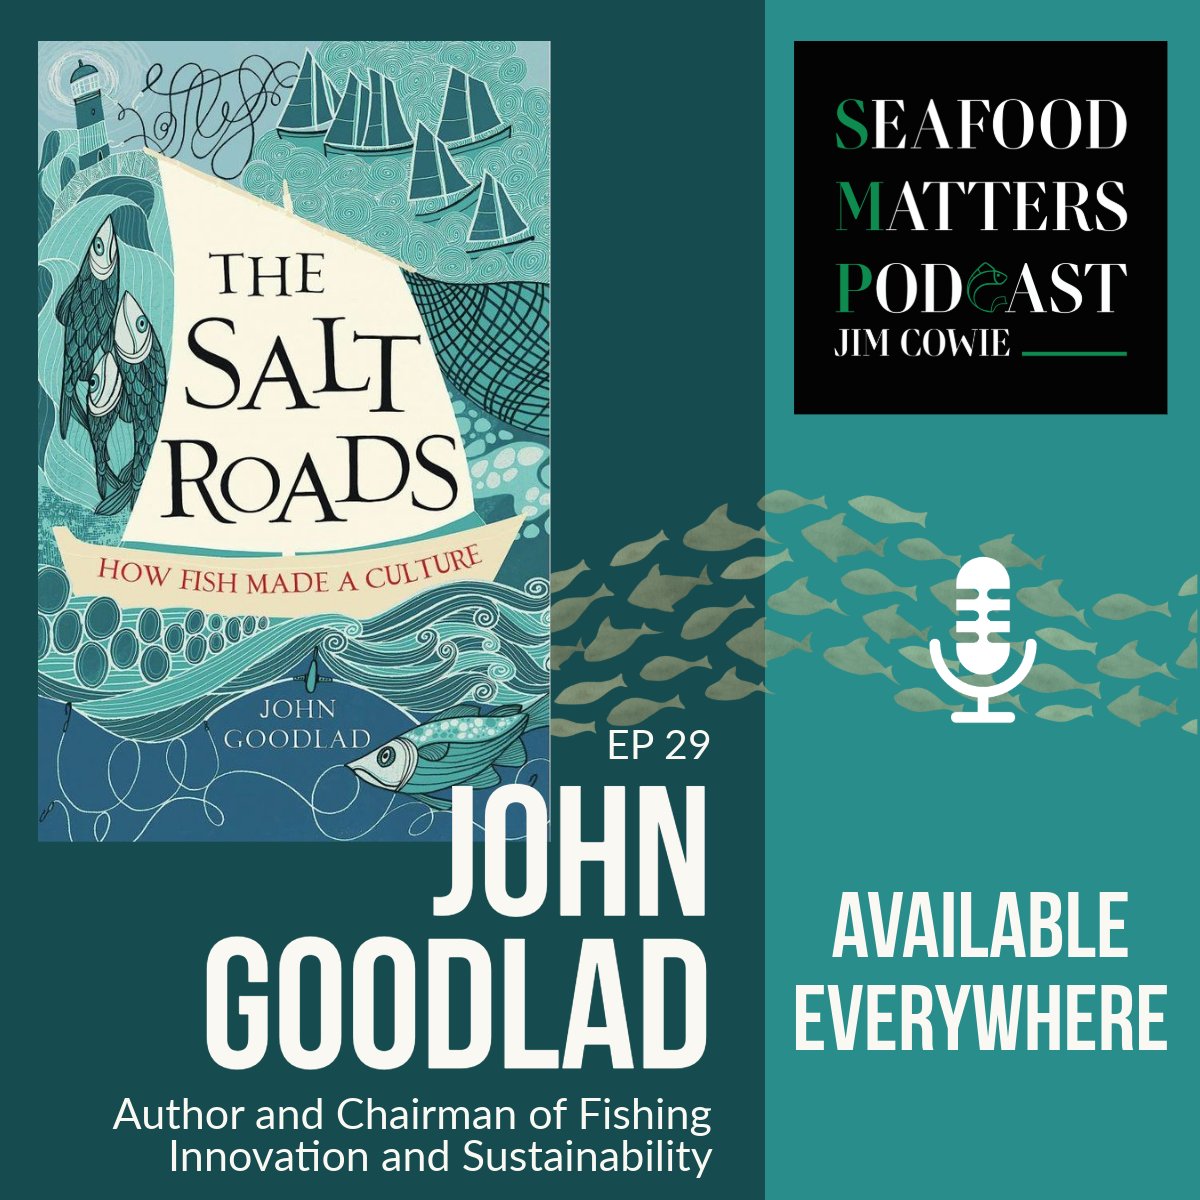 Episode 29 features John Goodlad from Shetland sharing stories from his best-selling book - The Salt Roads. @seafoodmatterspodcast @FisherGoodlad